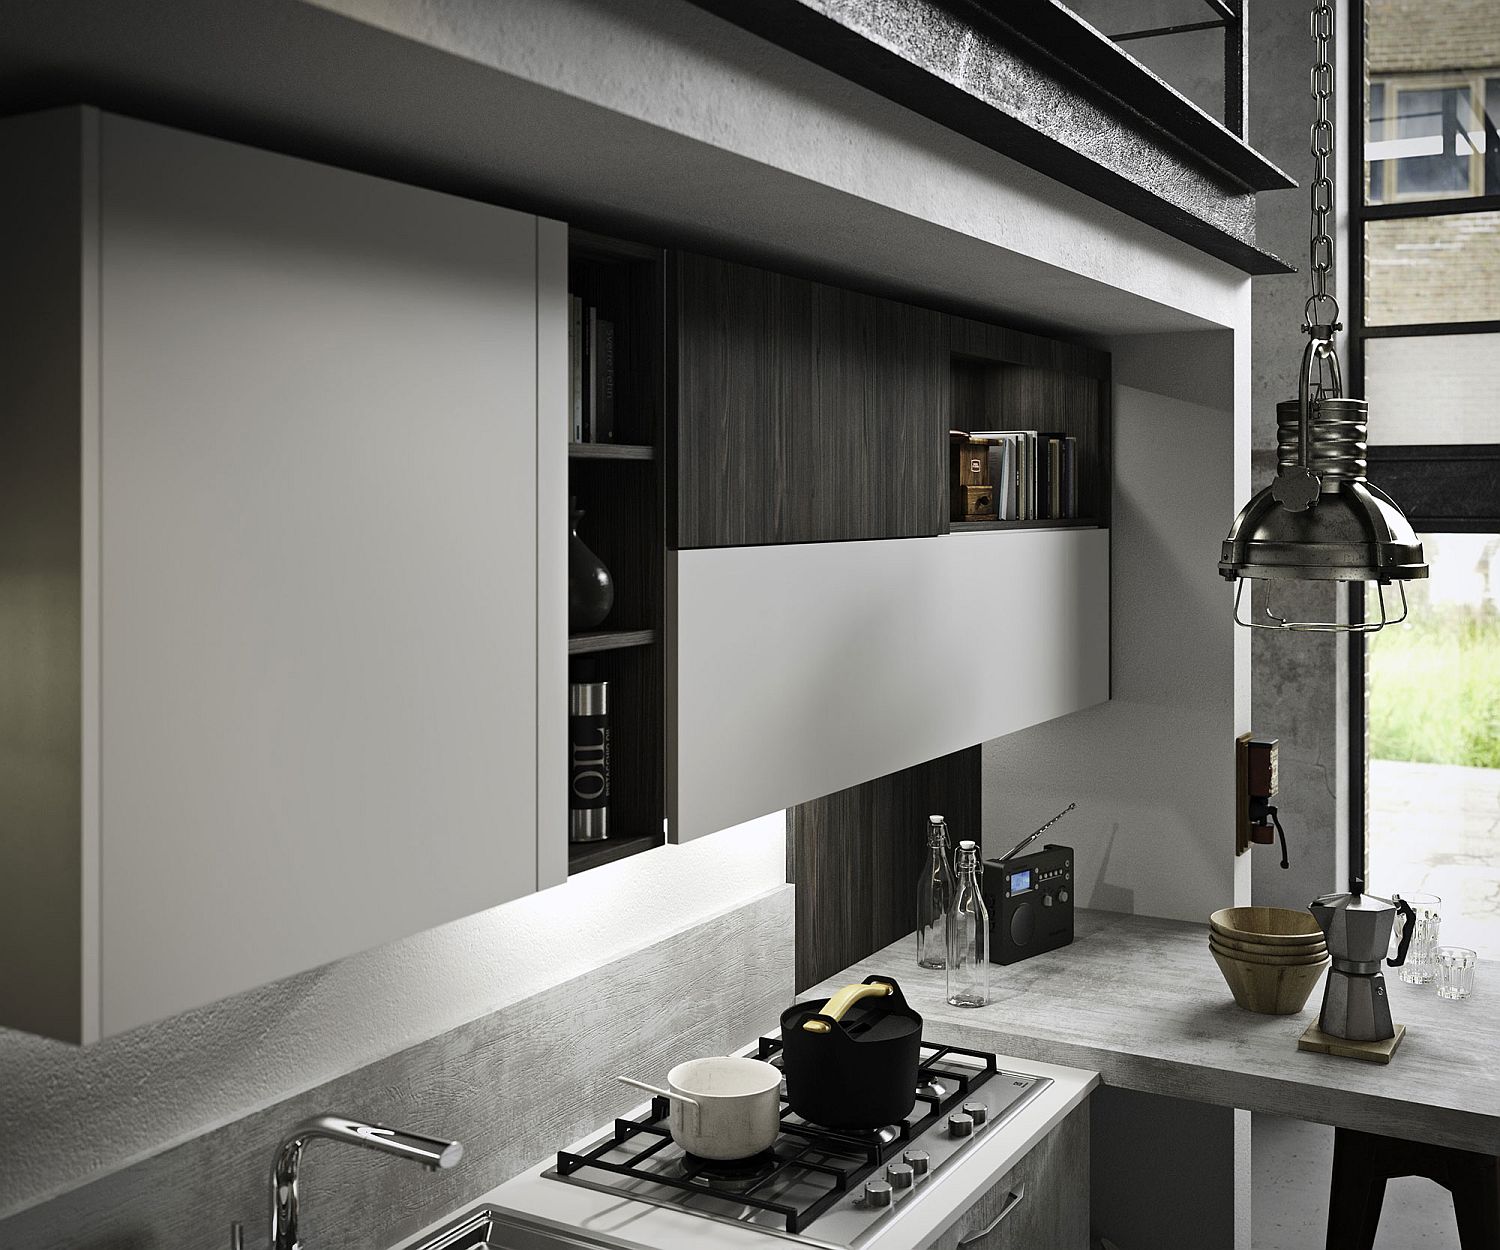 Closer-look-at-the-modular-kitchen-shelving-from-Snaidero